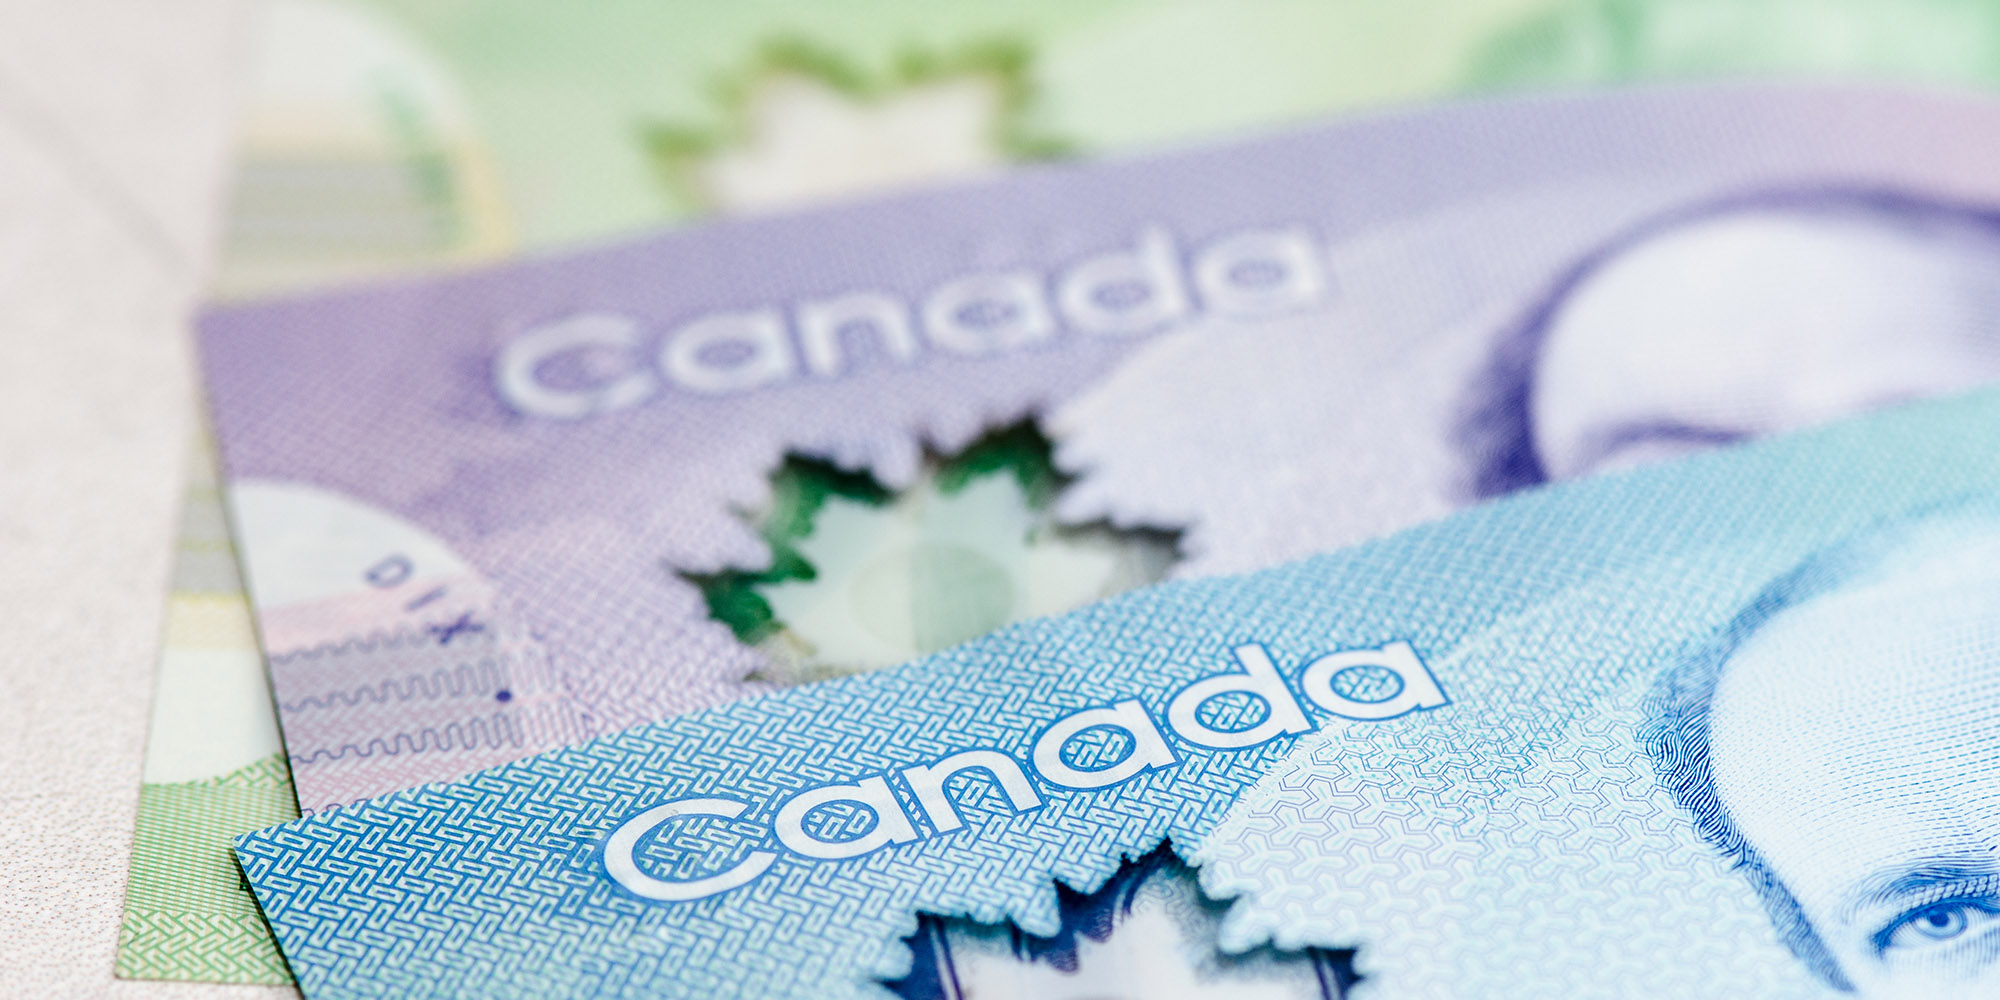 Canadian banknotes. Photo: KMR Photography, Flickr